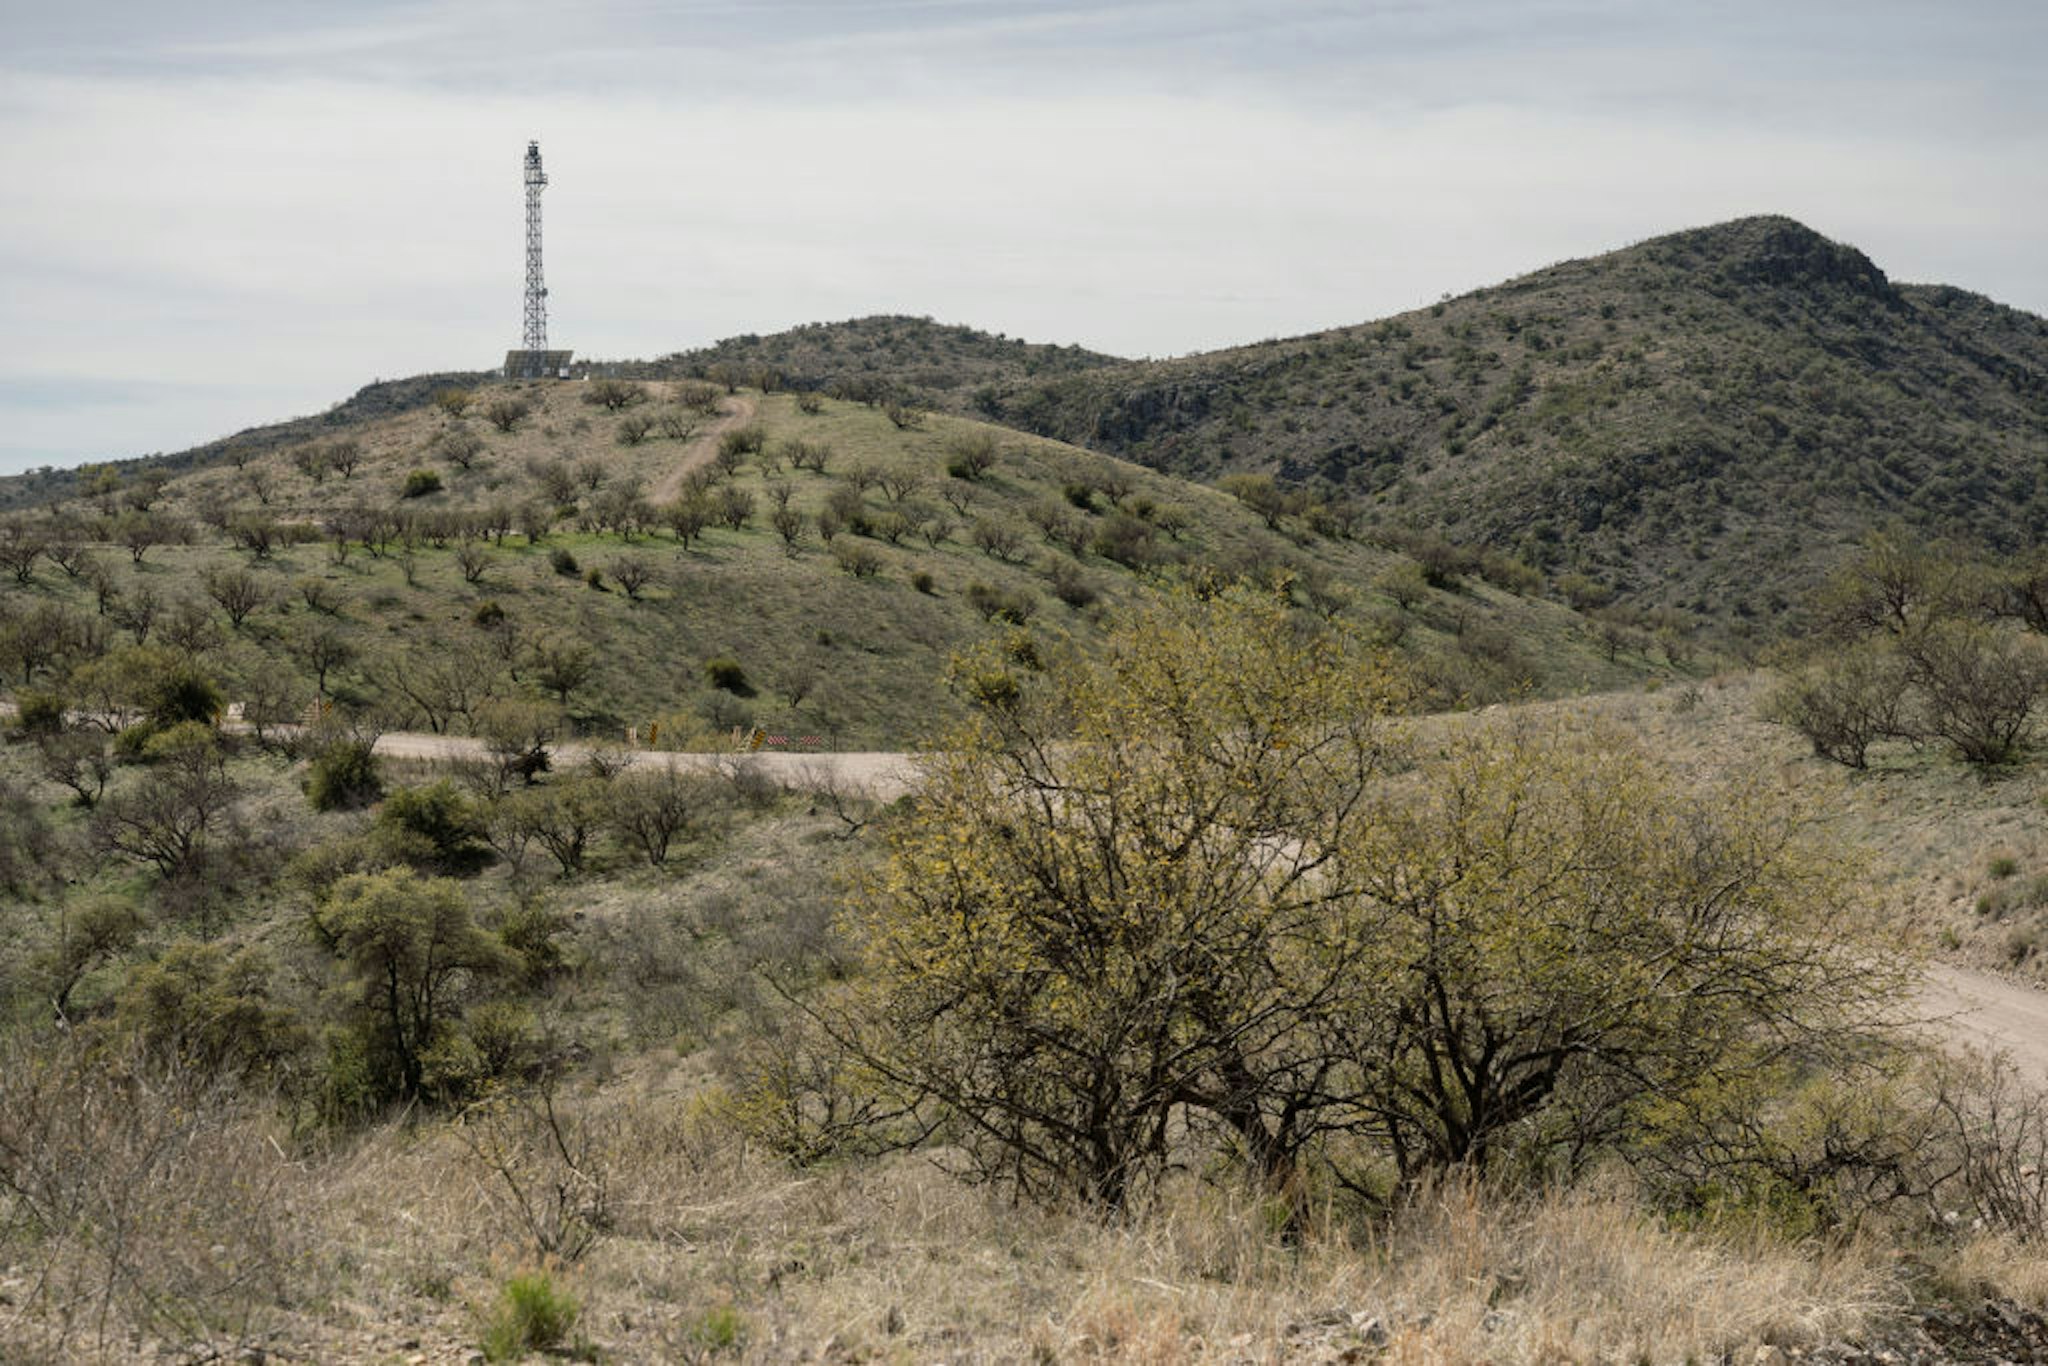 A Border Patrol survaillance tower at the US-Mexico border near Sasabe, Arizona, US, on Wednesday, March 13, 2024. During the first four months of fiscal year 2024, Border Patrol recorded more than 250,000 migrant apprehensions in the Tucson sector in Arizona, the most of any region patrolled by the agency, according to federal government statistics, reports CBS.